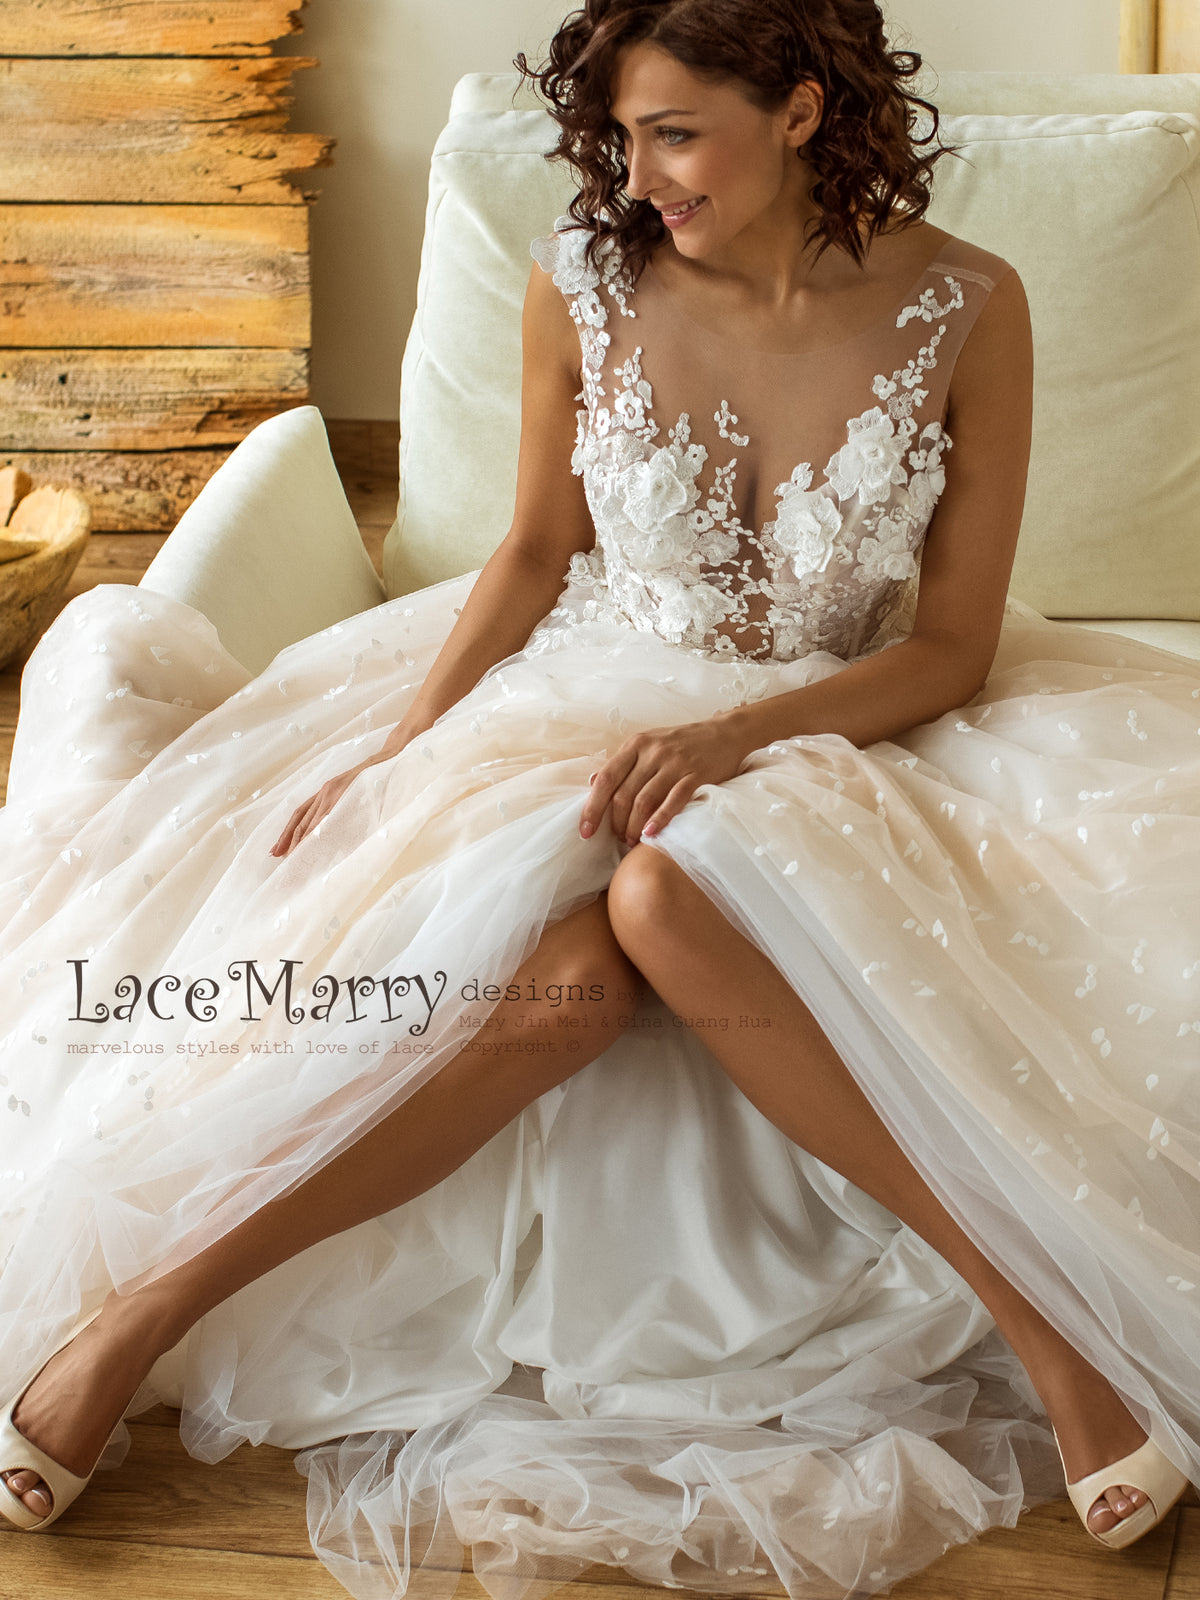 Lace Covered Bra Cups and Lace Panel for More Coverage - LaceMarry